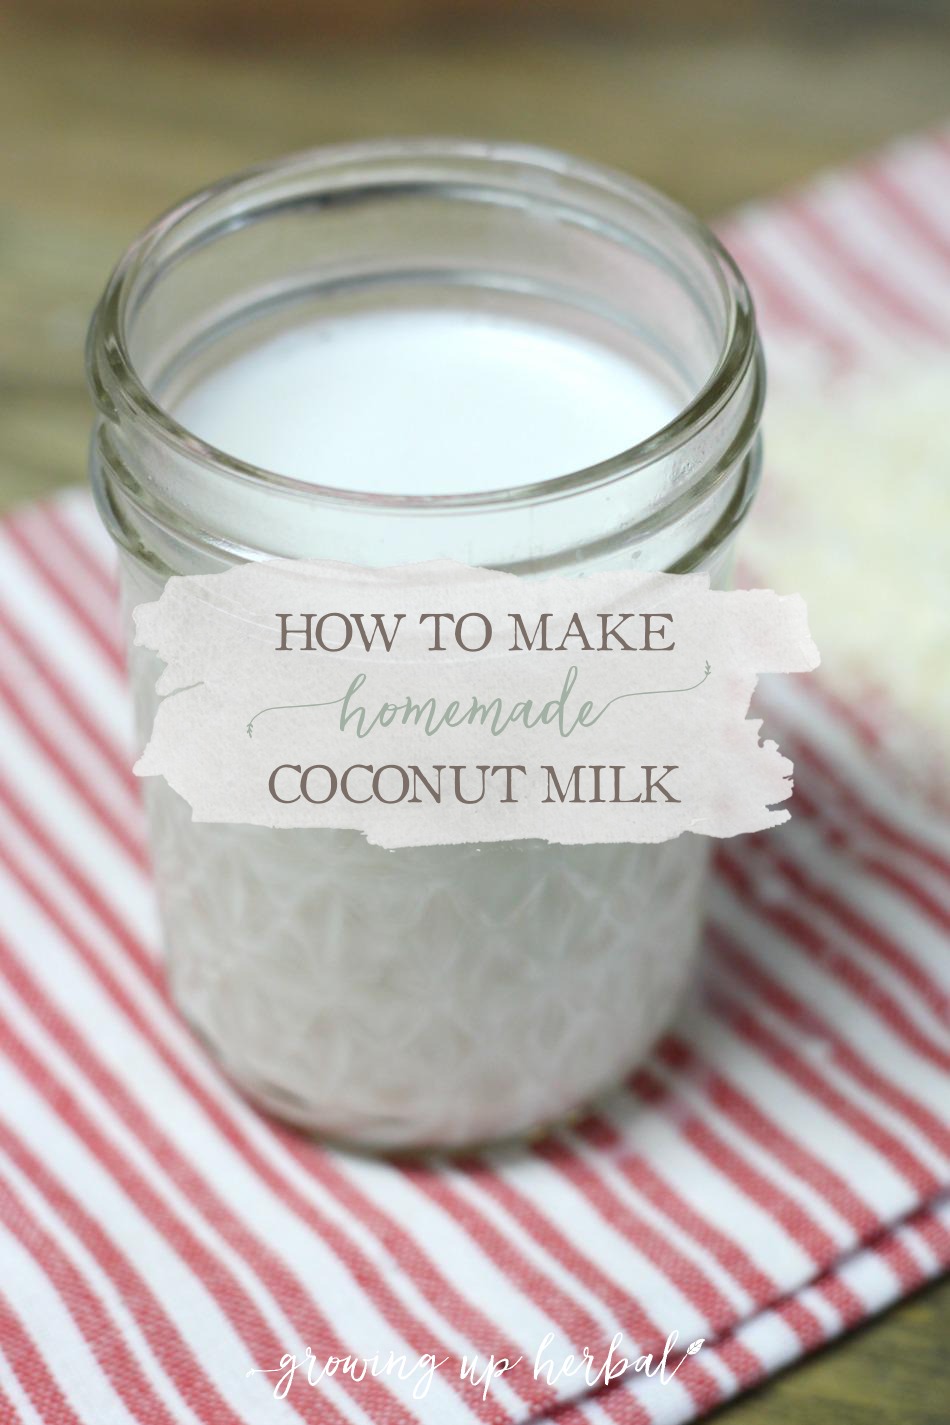 How To Make Homemade Coconut Milk | Growing Up Herbal | Make homemade coconut milk at home. It's easier than you think, and super healthy for you!